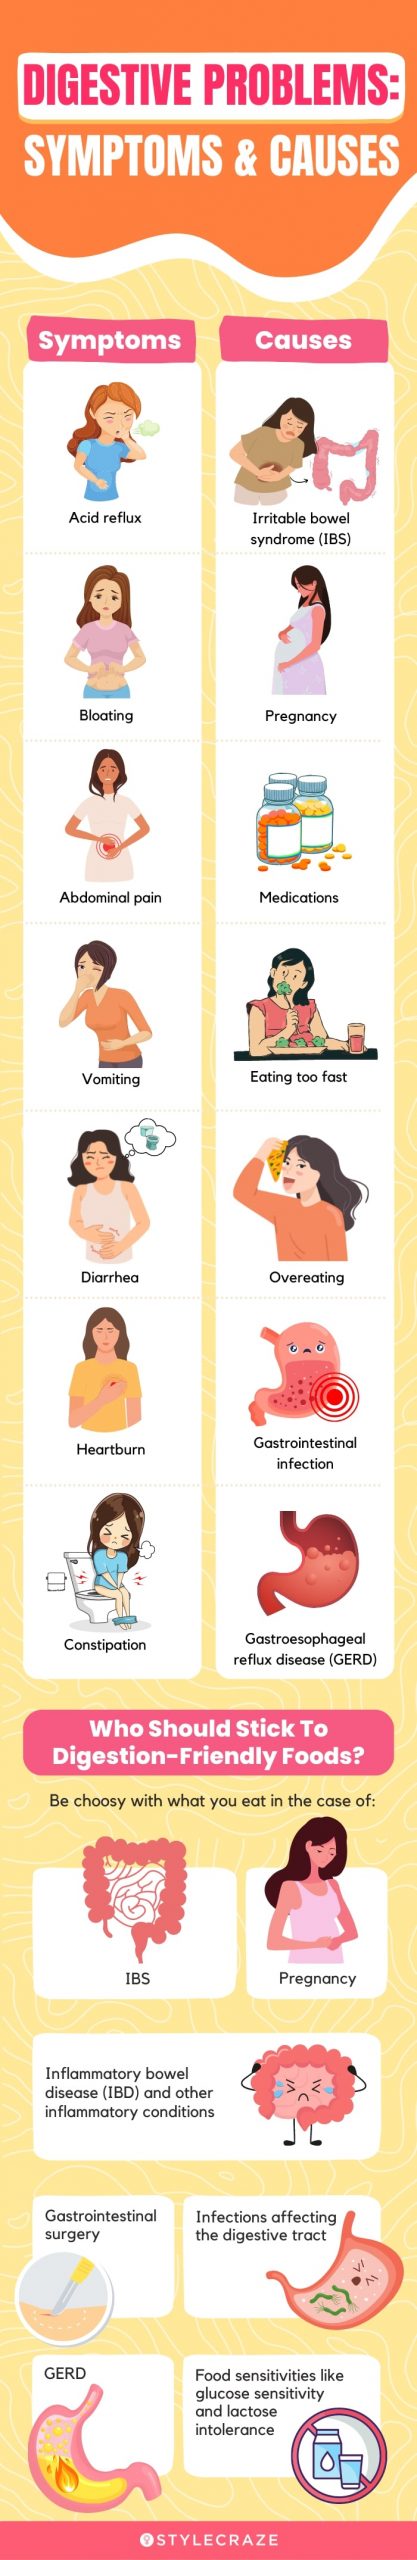 digestive problems symptoms and causes [infographic]